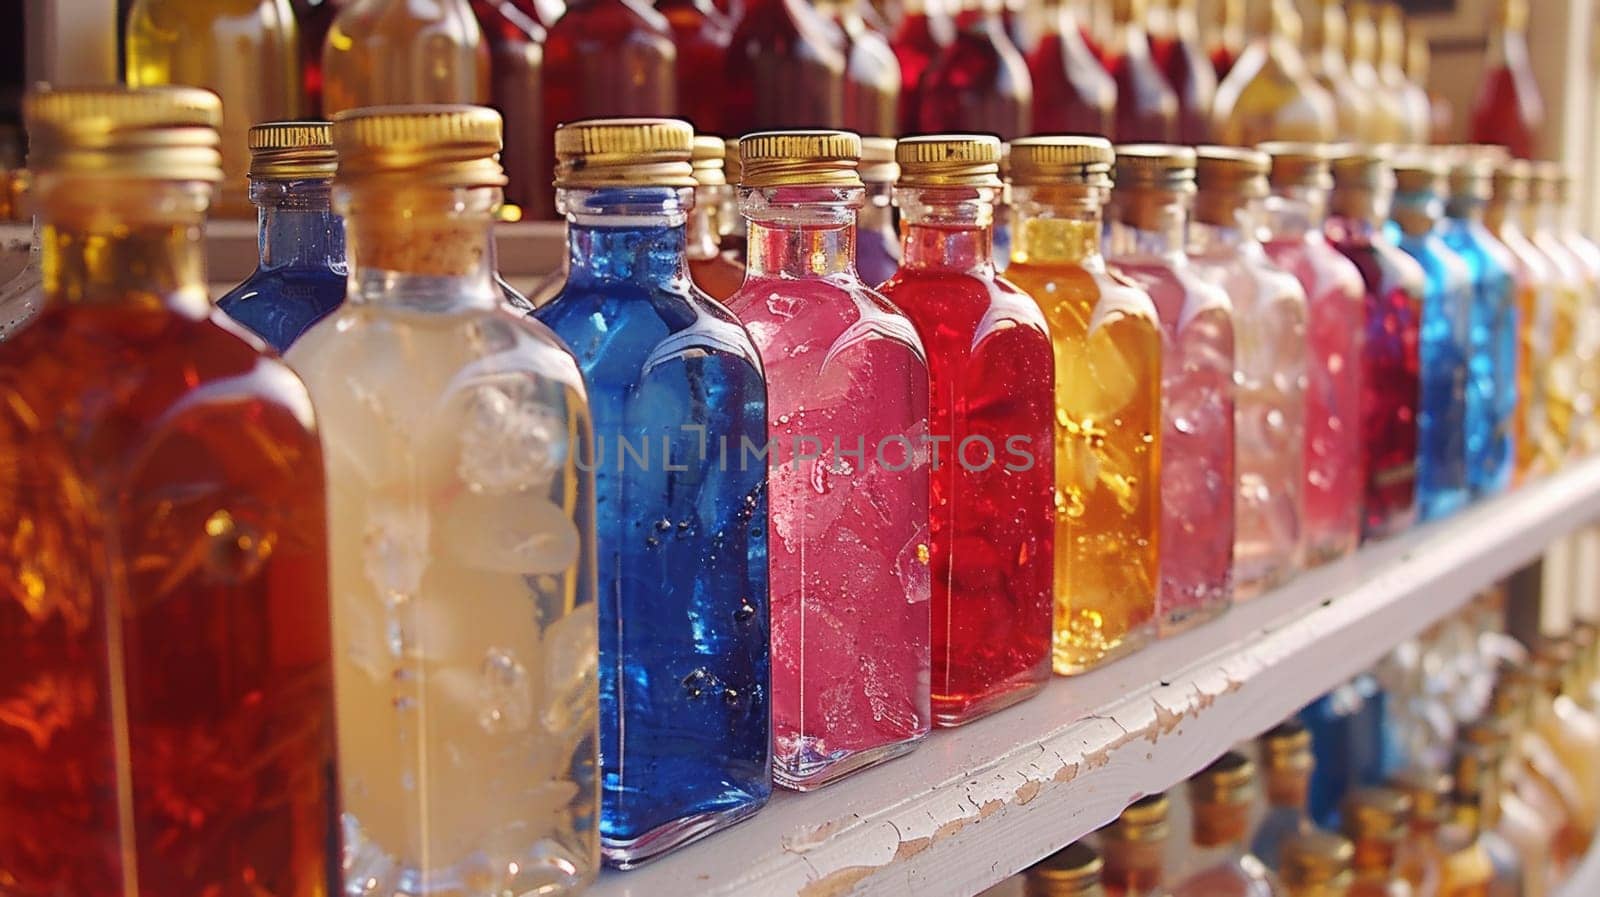 A row of bottles filled with different colored liquids on a shelf